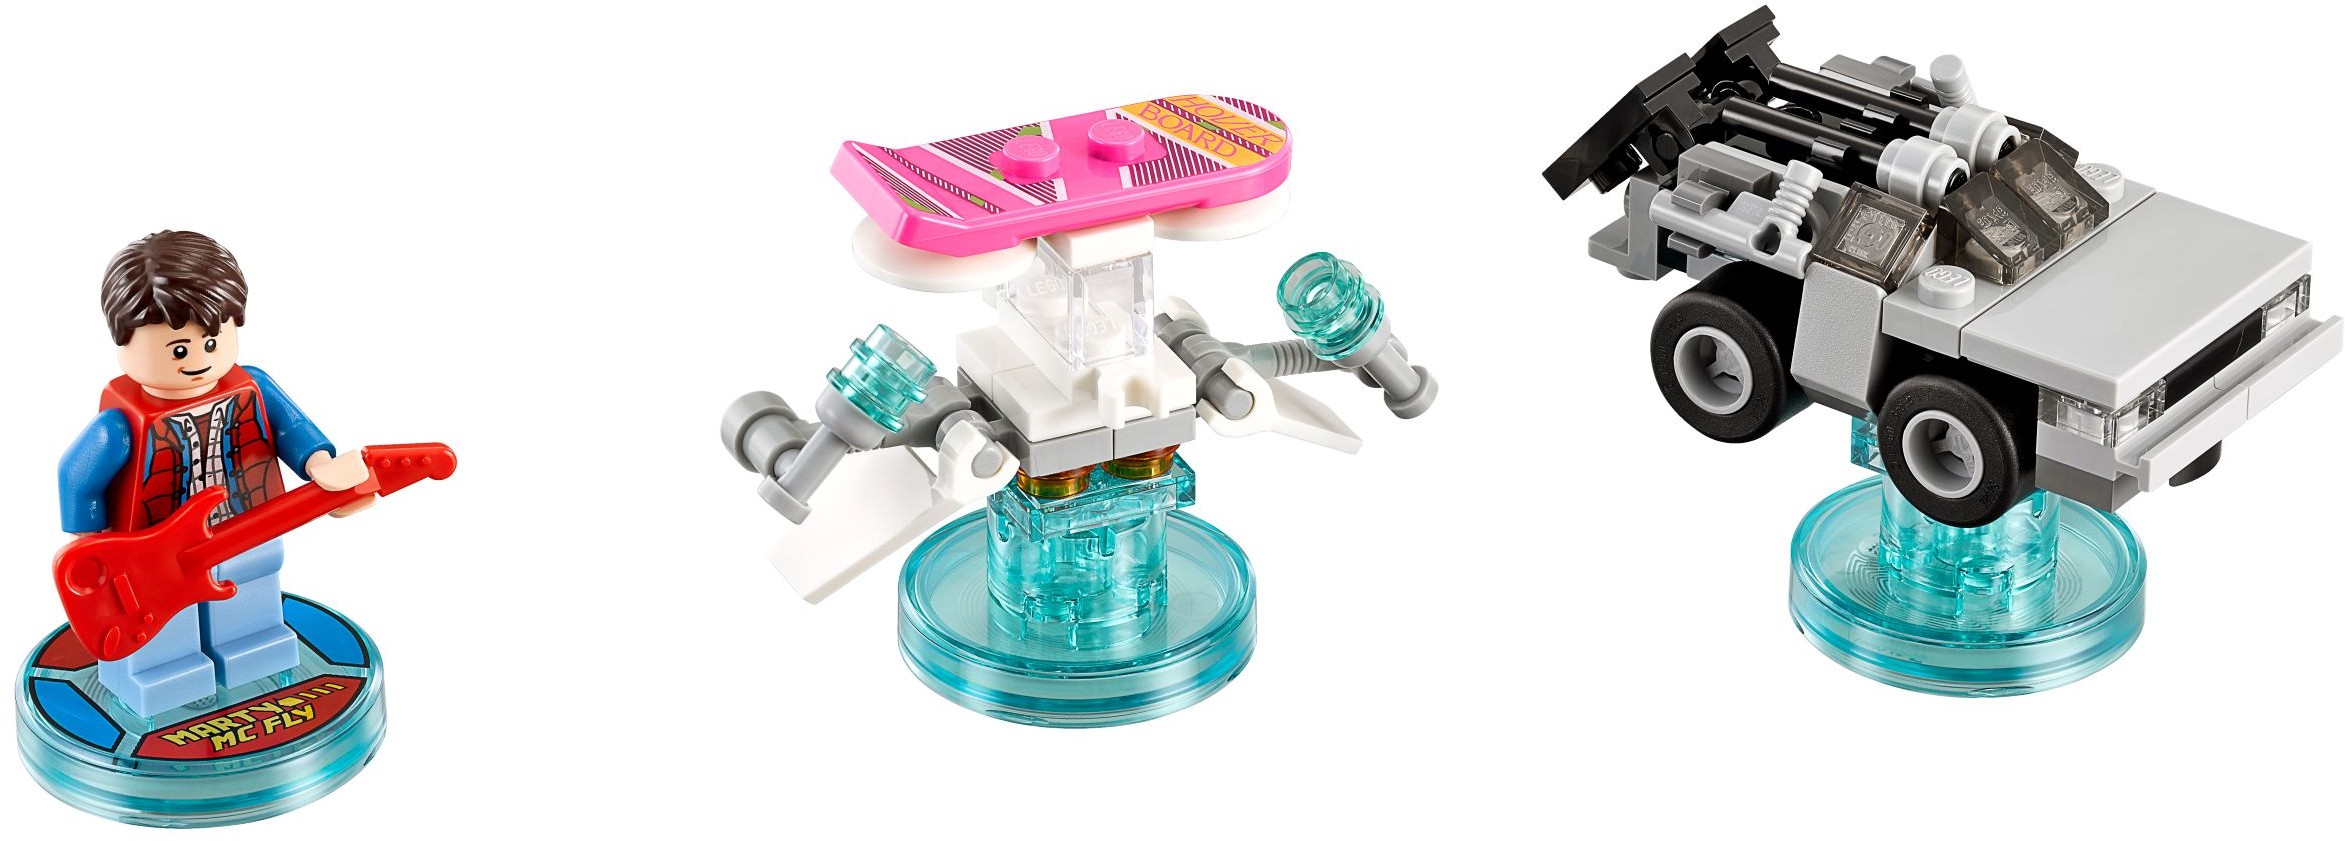 lego dimensions back to the future instructions hoverboard